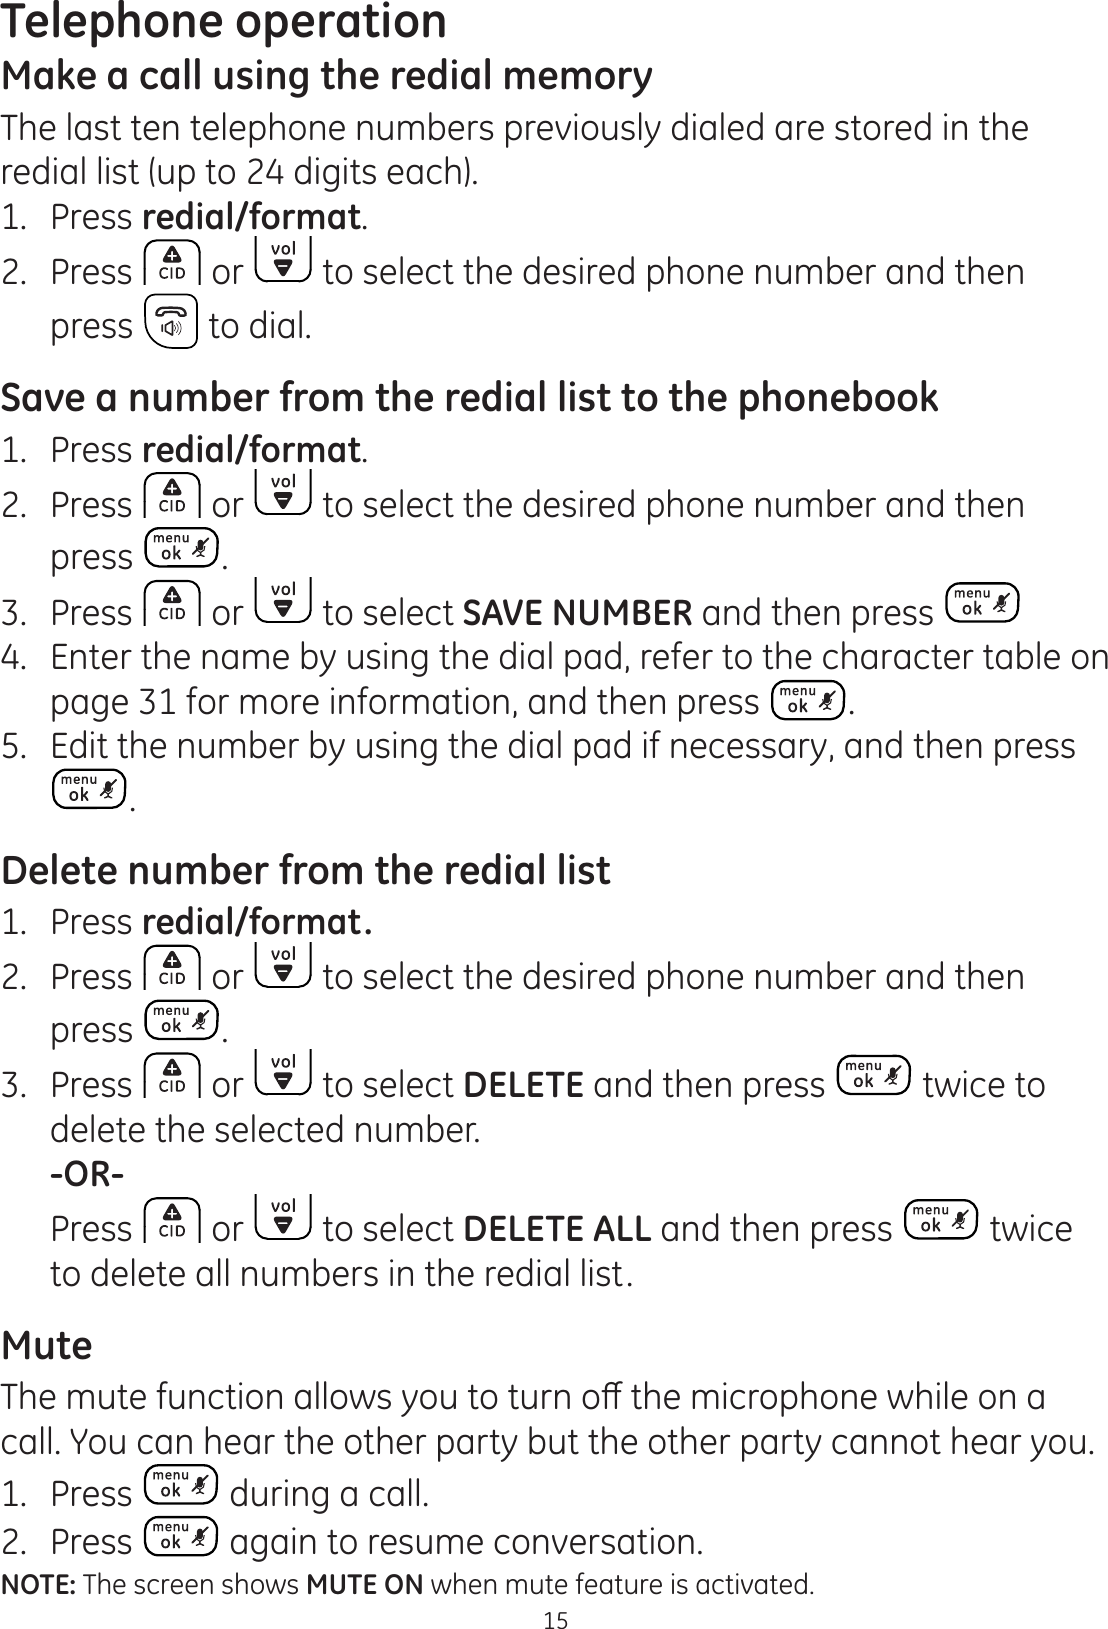 Telephone operation15Make a call using the redial memoryThe last ten telephone numbers previously dialed are stored in the redial list (up to 24 digits each).1.  Press redial/format.2.  Press  or   to select the desired phone number and then press   to dial.Save a number from the redial list to the phonebook1.  Press redial/format.2.  Press   or   to select the desired phone number and then press  .3.  Press   or   to select SAVE NUMBER and then press 4.  Enter the name by using the dial pad, refer to the character table on  page 31 for more information, and then press  .5.  Edit the number by using the dial pad if necessary, and then press .Delete number from the redial list1.  Press redial/format.2.  Press   or   to select the desired phone number and then press  .3.  Press   or   to select DELETE and then press   twice to delete the selected number. -OR-  Press   or   to select DELETE ALL and then press   twice to delete all numbers in the redial list.Mute7KHPXWHIXQFWLRQDOORZV\RXWRWXUQRȺWKHPLFURSKRQHZKLOHRQDcall. You can hear the other party but the other party cannot hear you.1.  Press   during a call.2.  Press   again to resume conversation.NOTE: The screen shows MUTE ON when mute feature is activated.